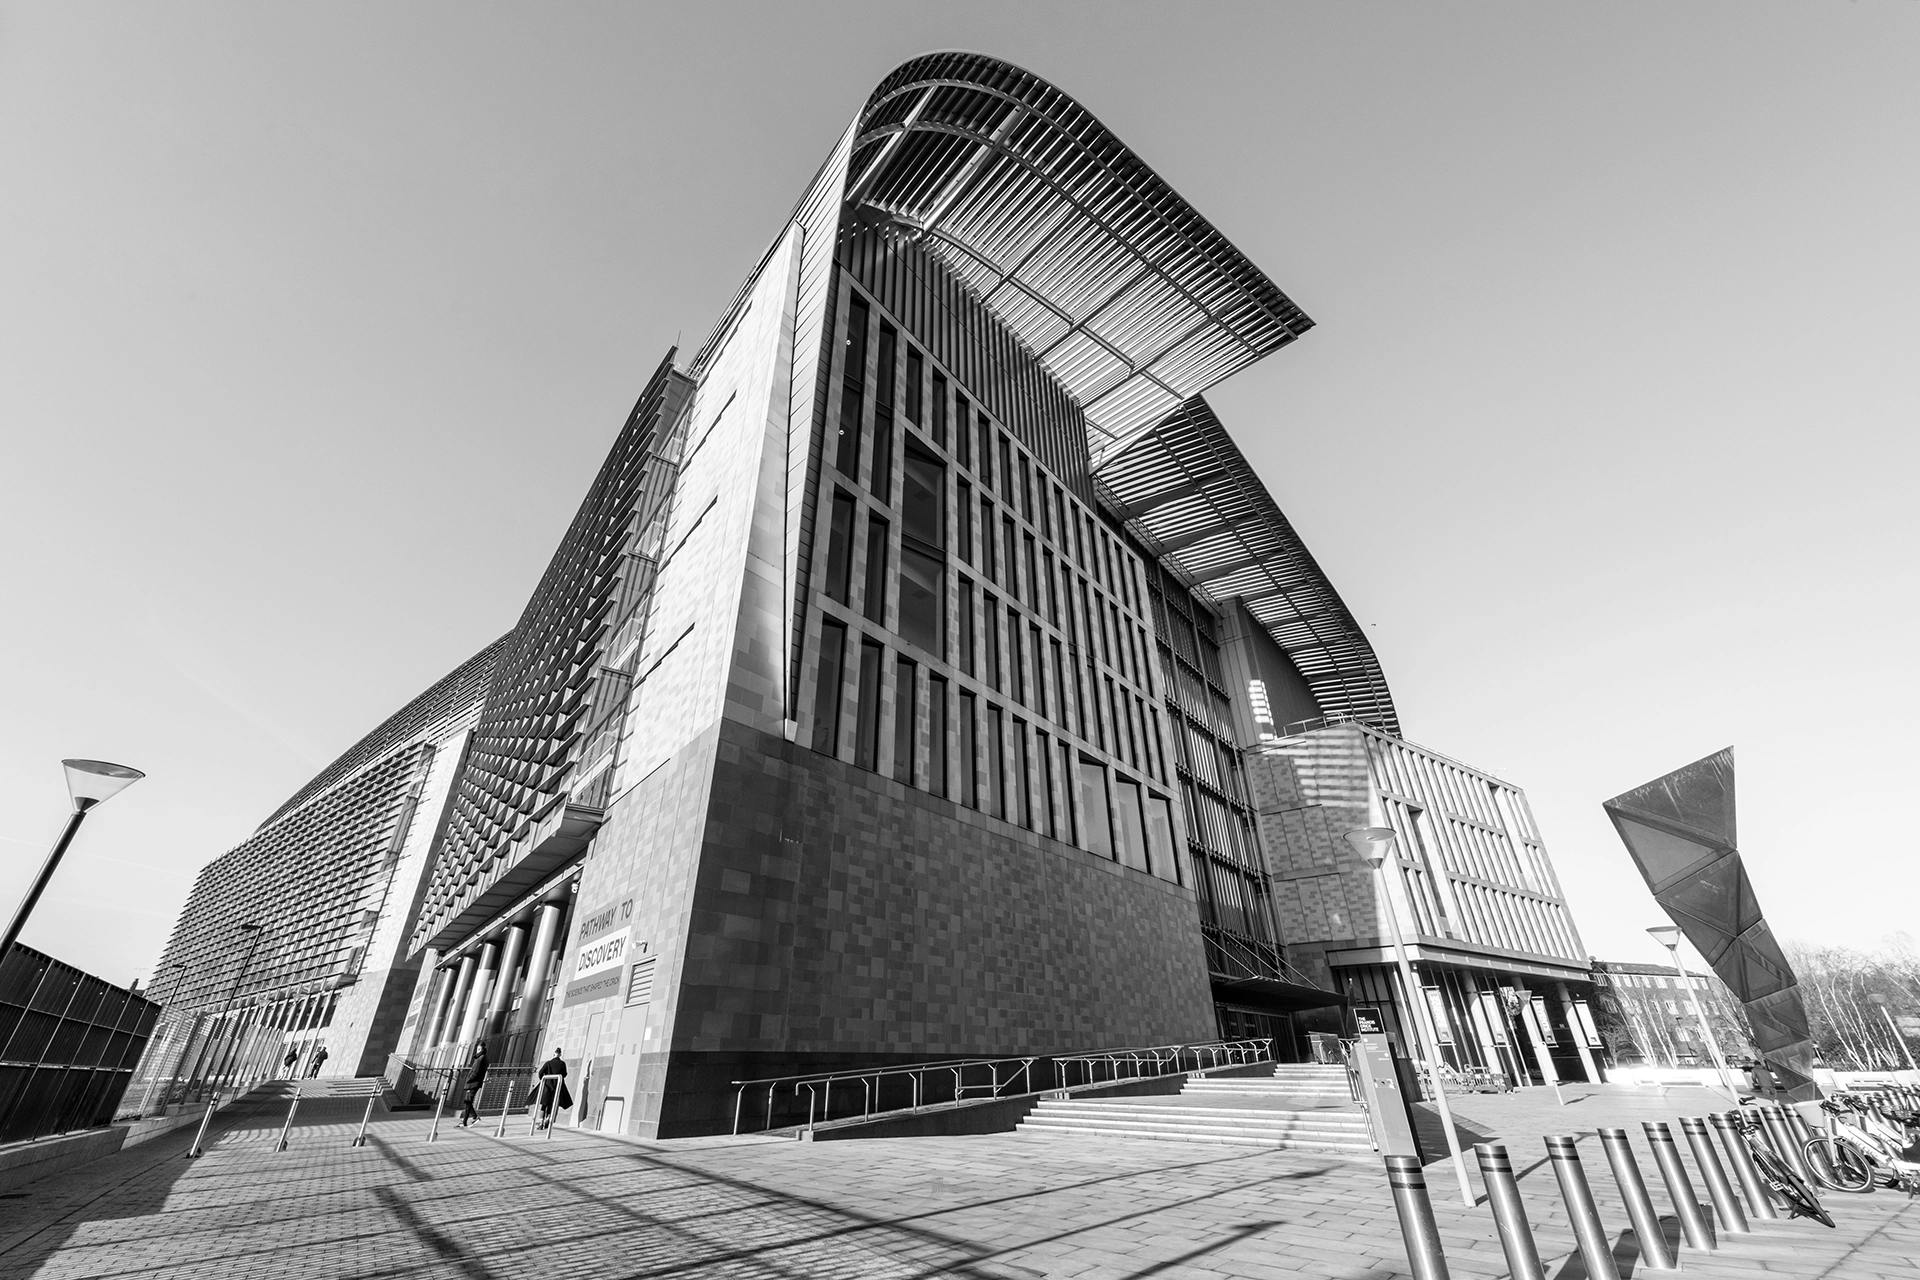 A photo of the Francis Crick Institute from the outside.